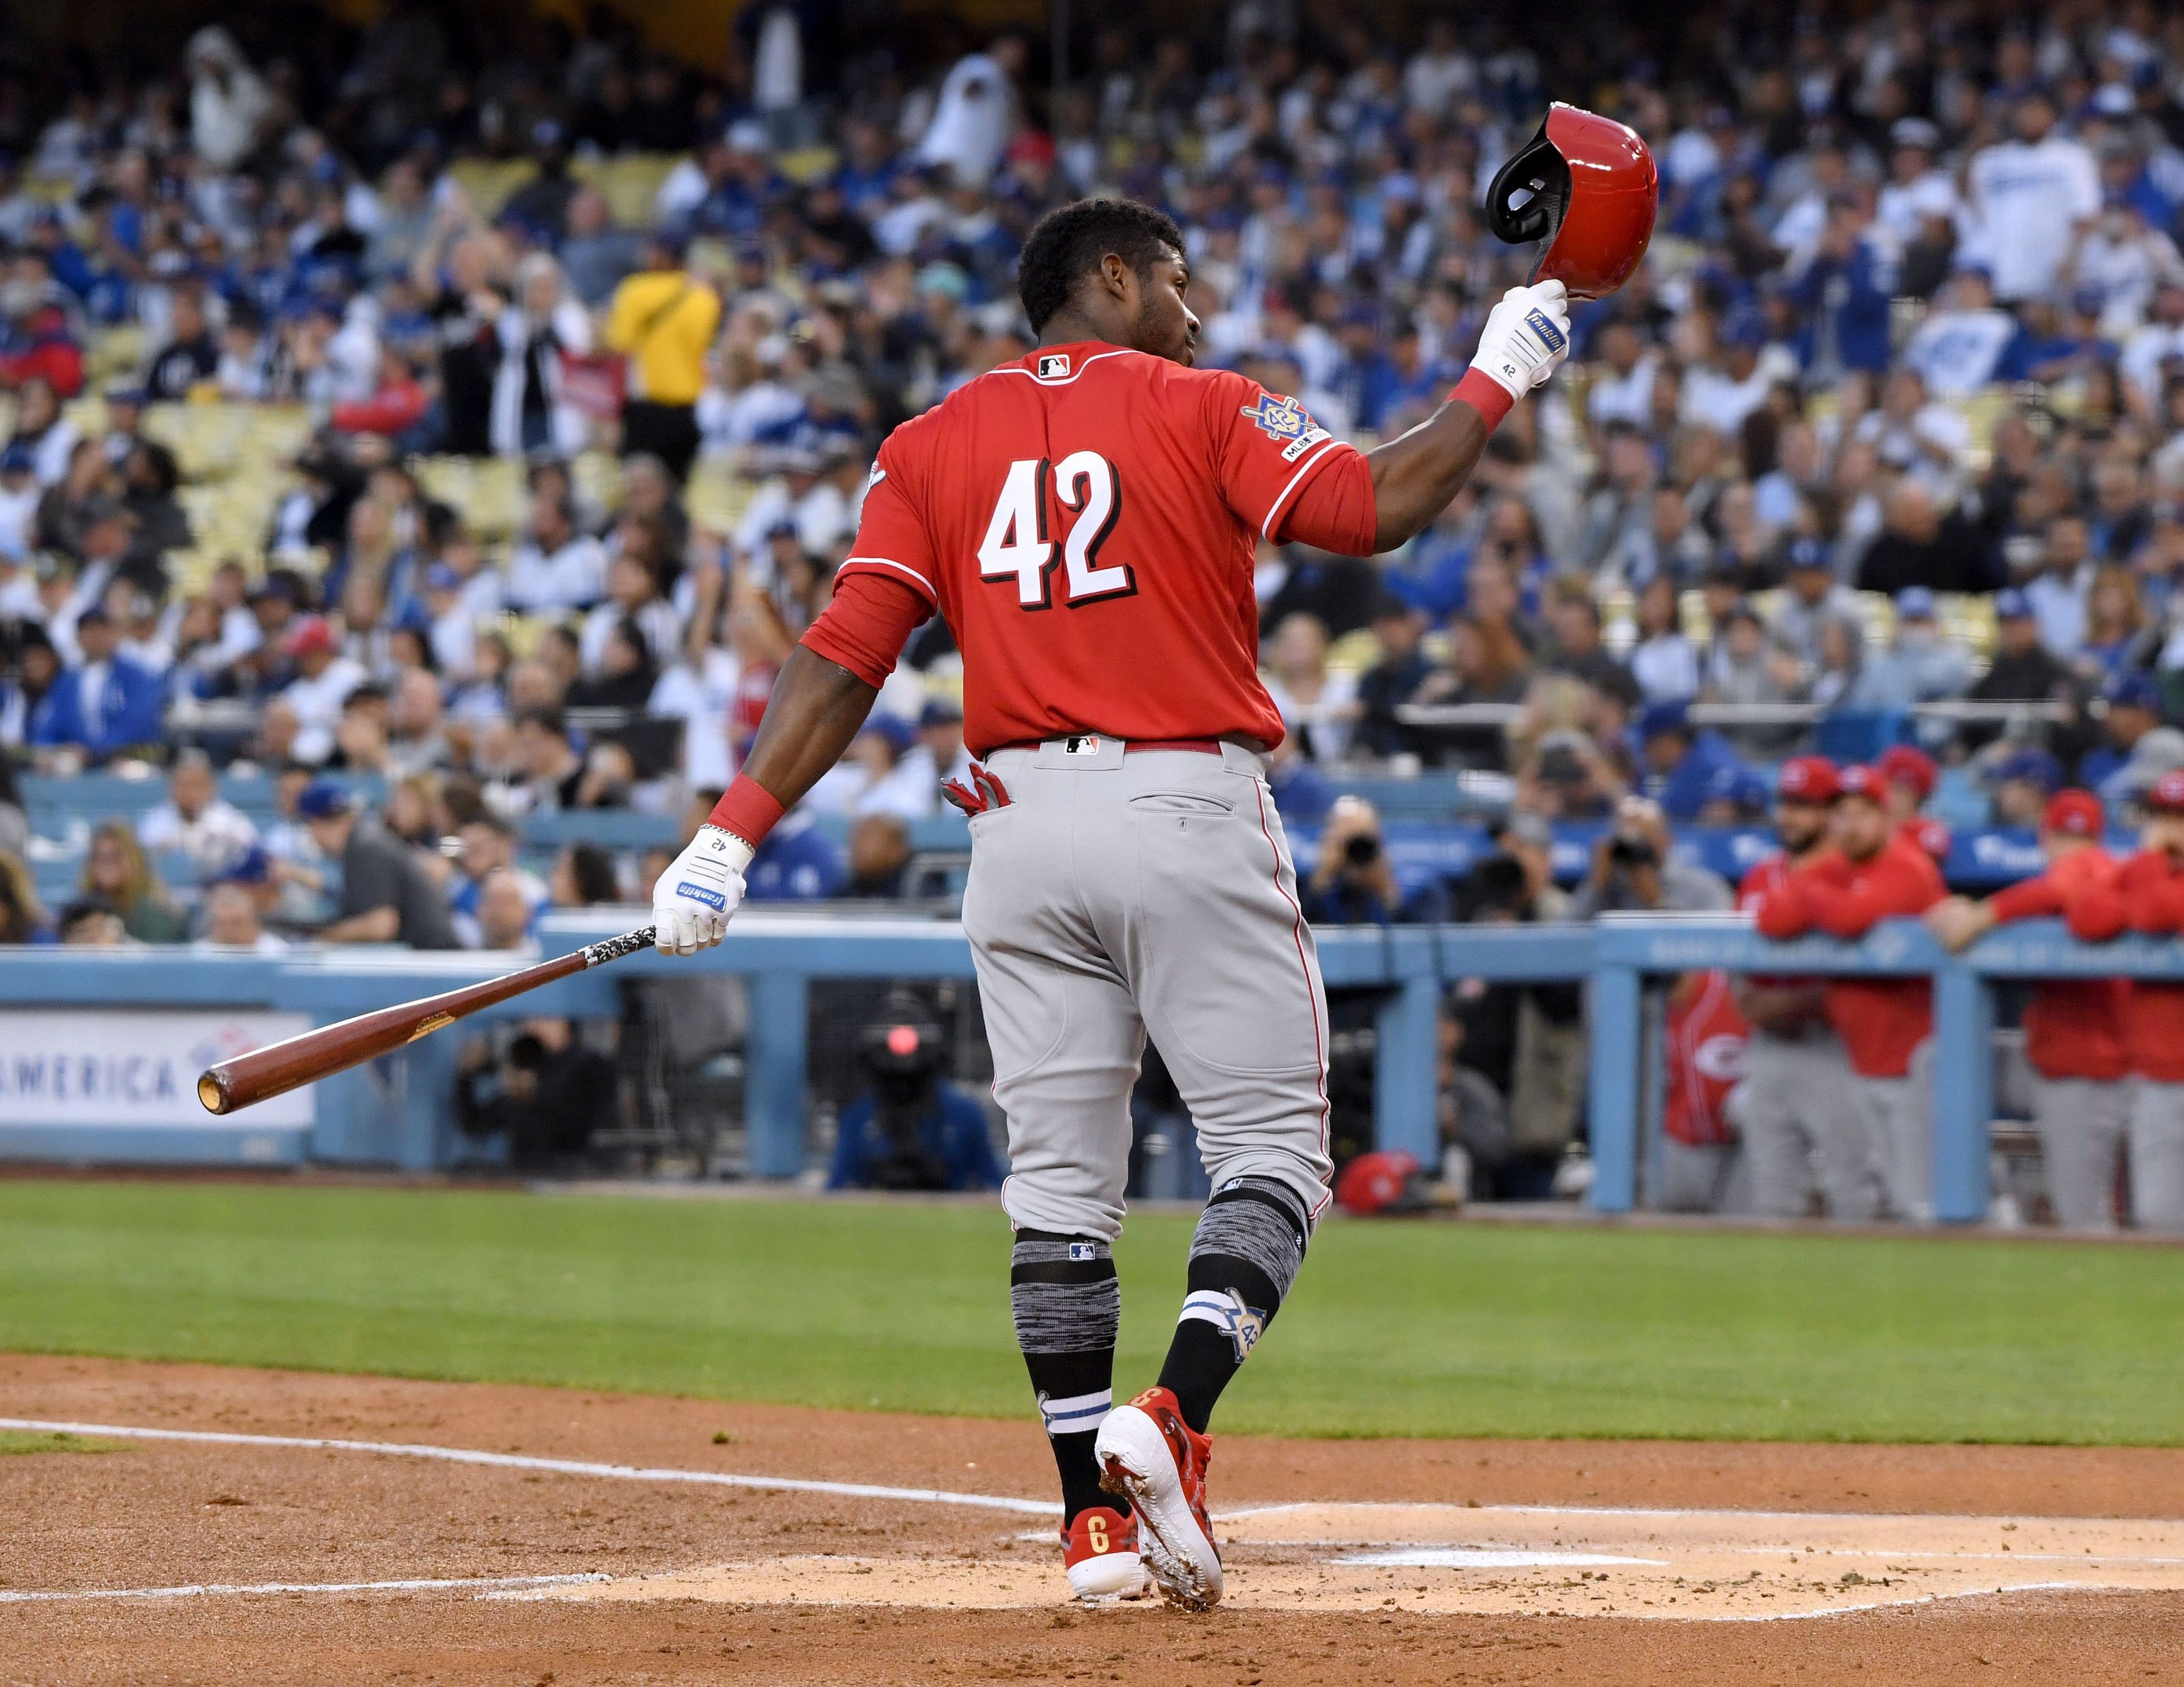 Cincinnati Reds Three takeaways from the walkoff loss to the Dodgers